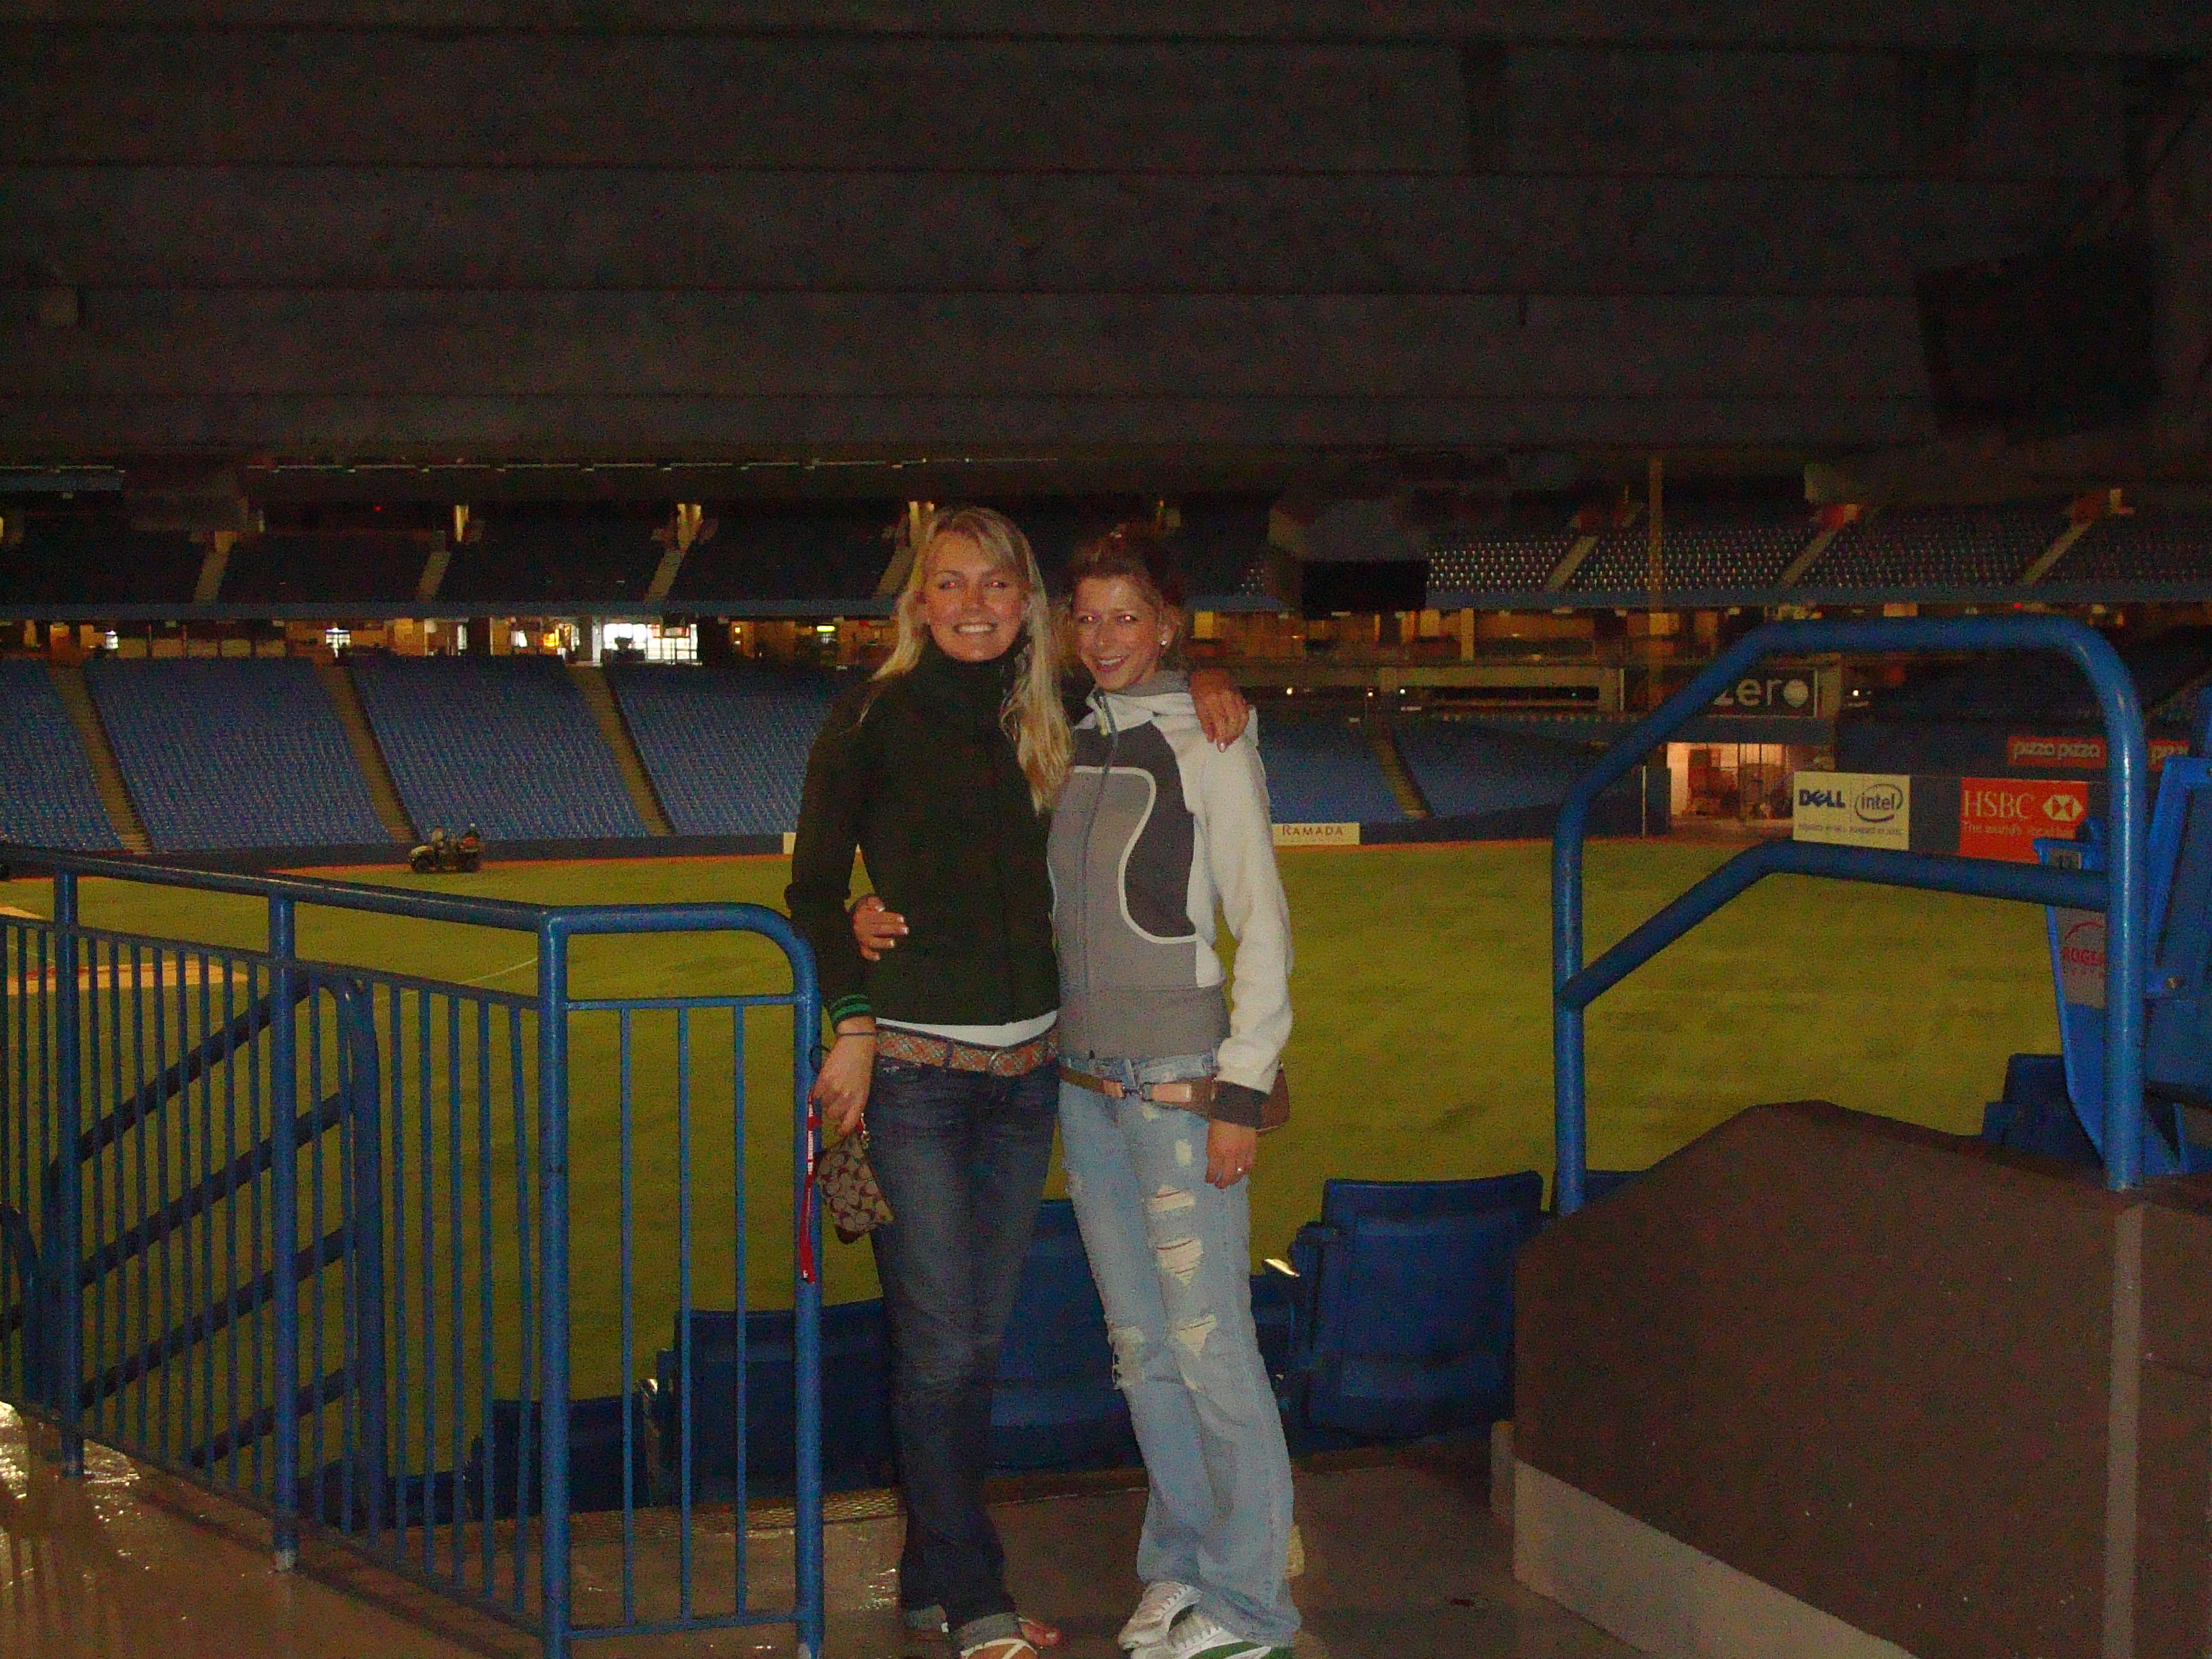 At the Rogers Centre